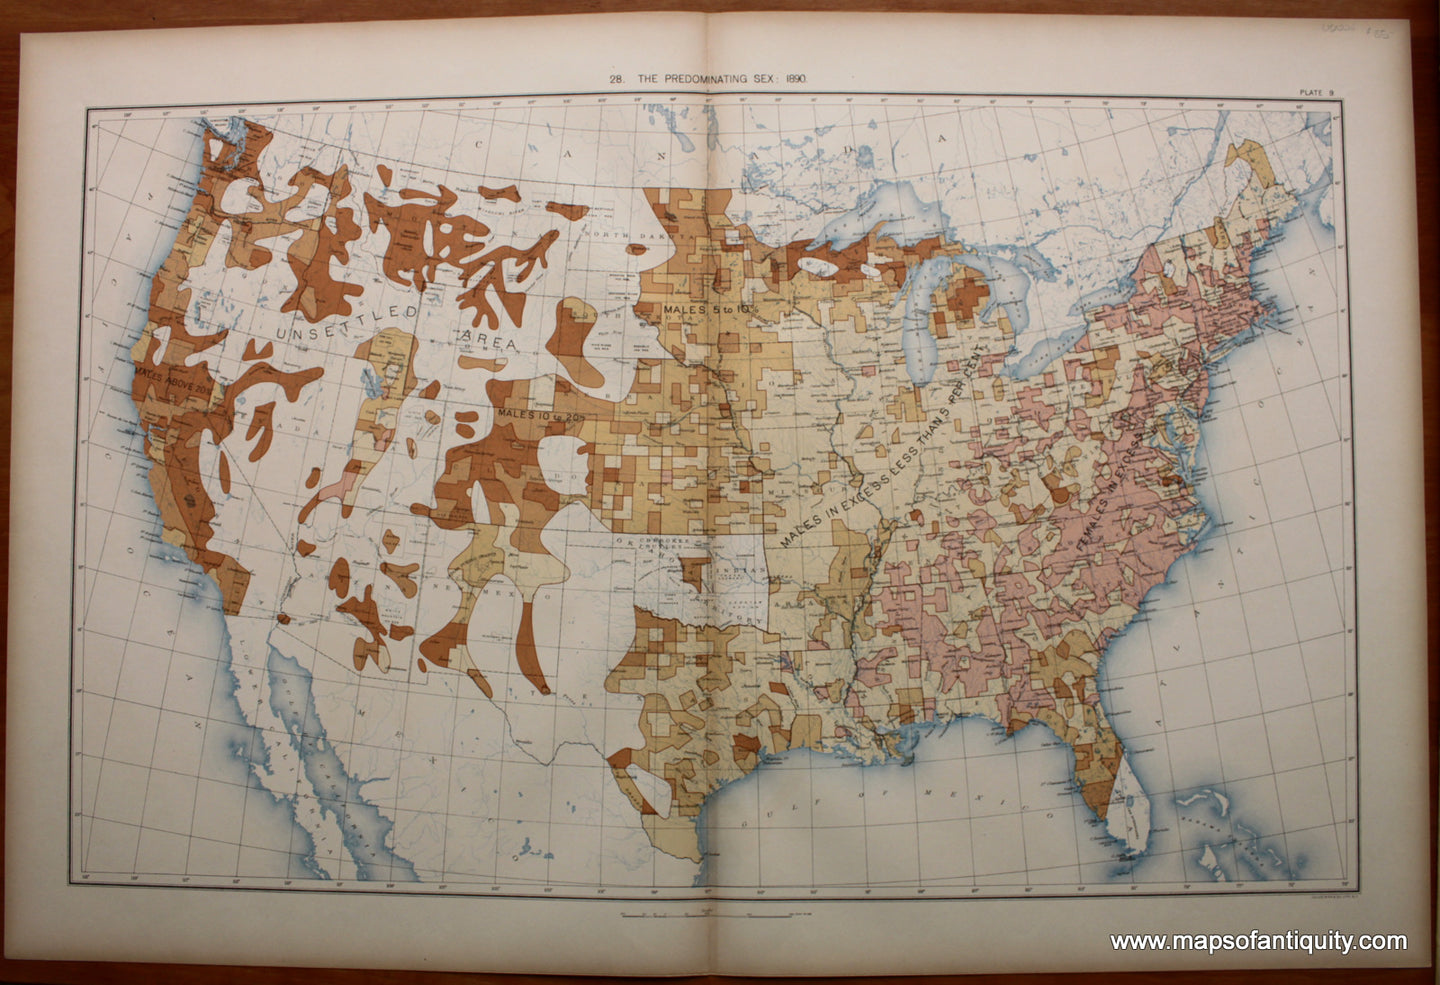 Antique-Printed-Color-Map-The-Predominating-Sex:-1890-United-States--United-States-General-1898-Gannett-Maps-Of-Antiquity